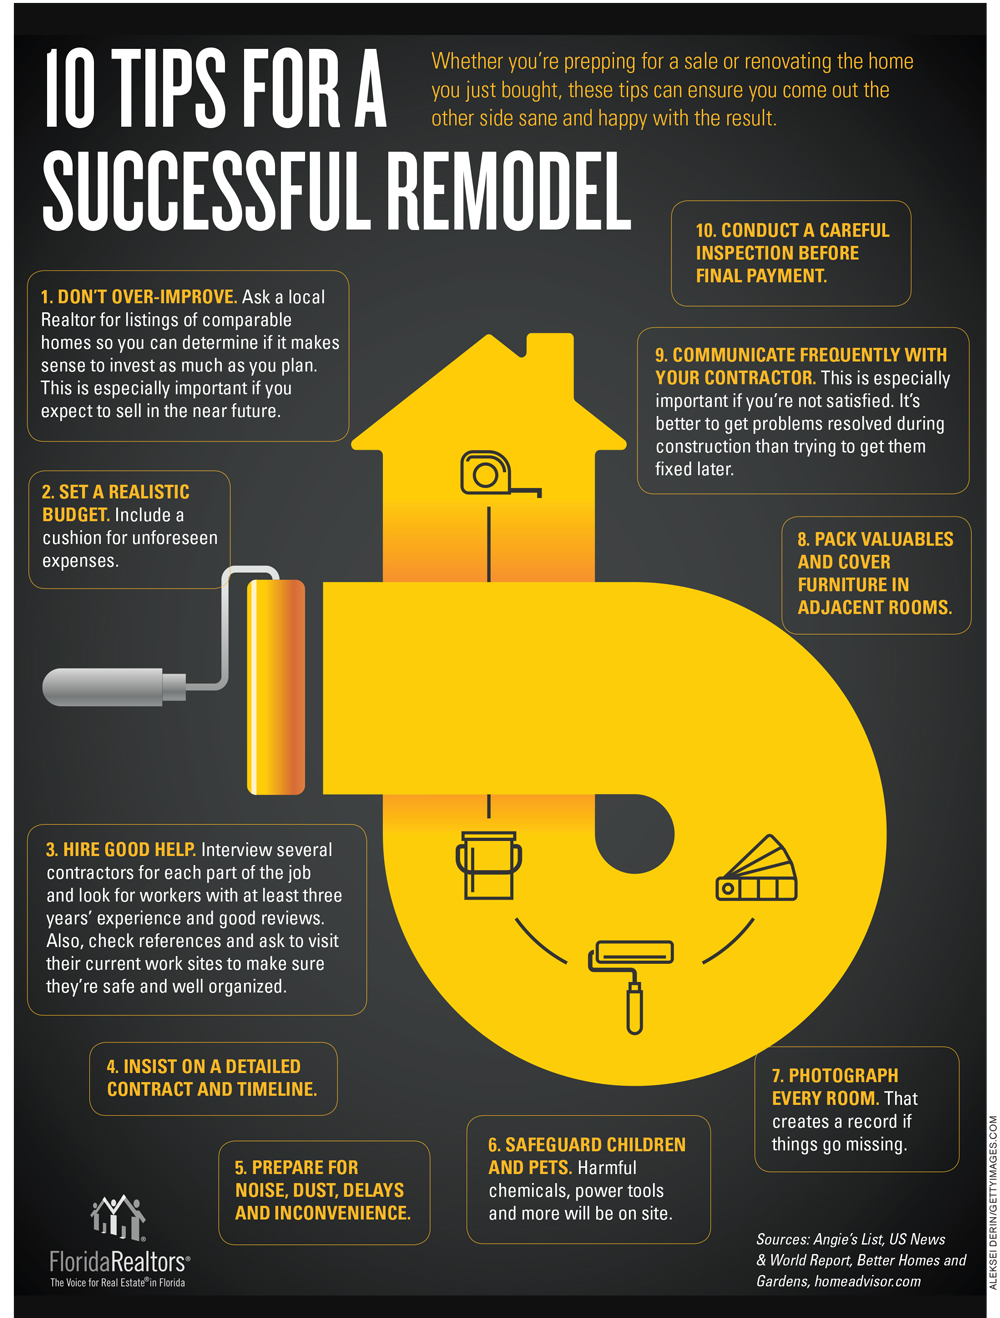 10 Tips for a Successful Remodel